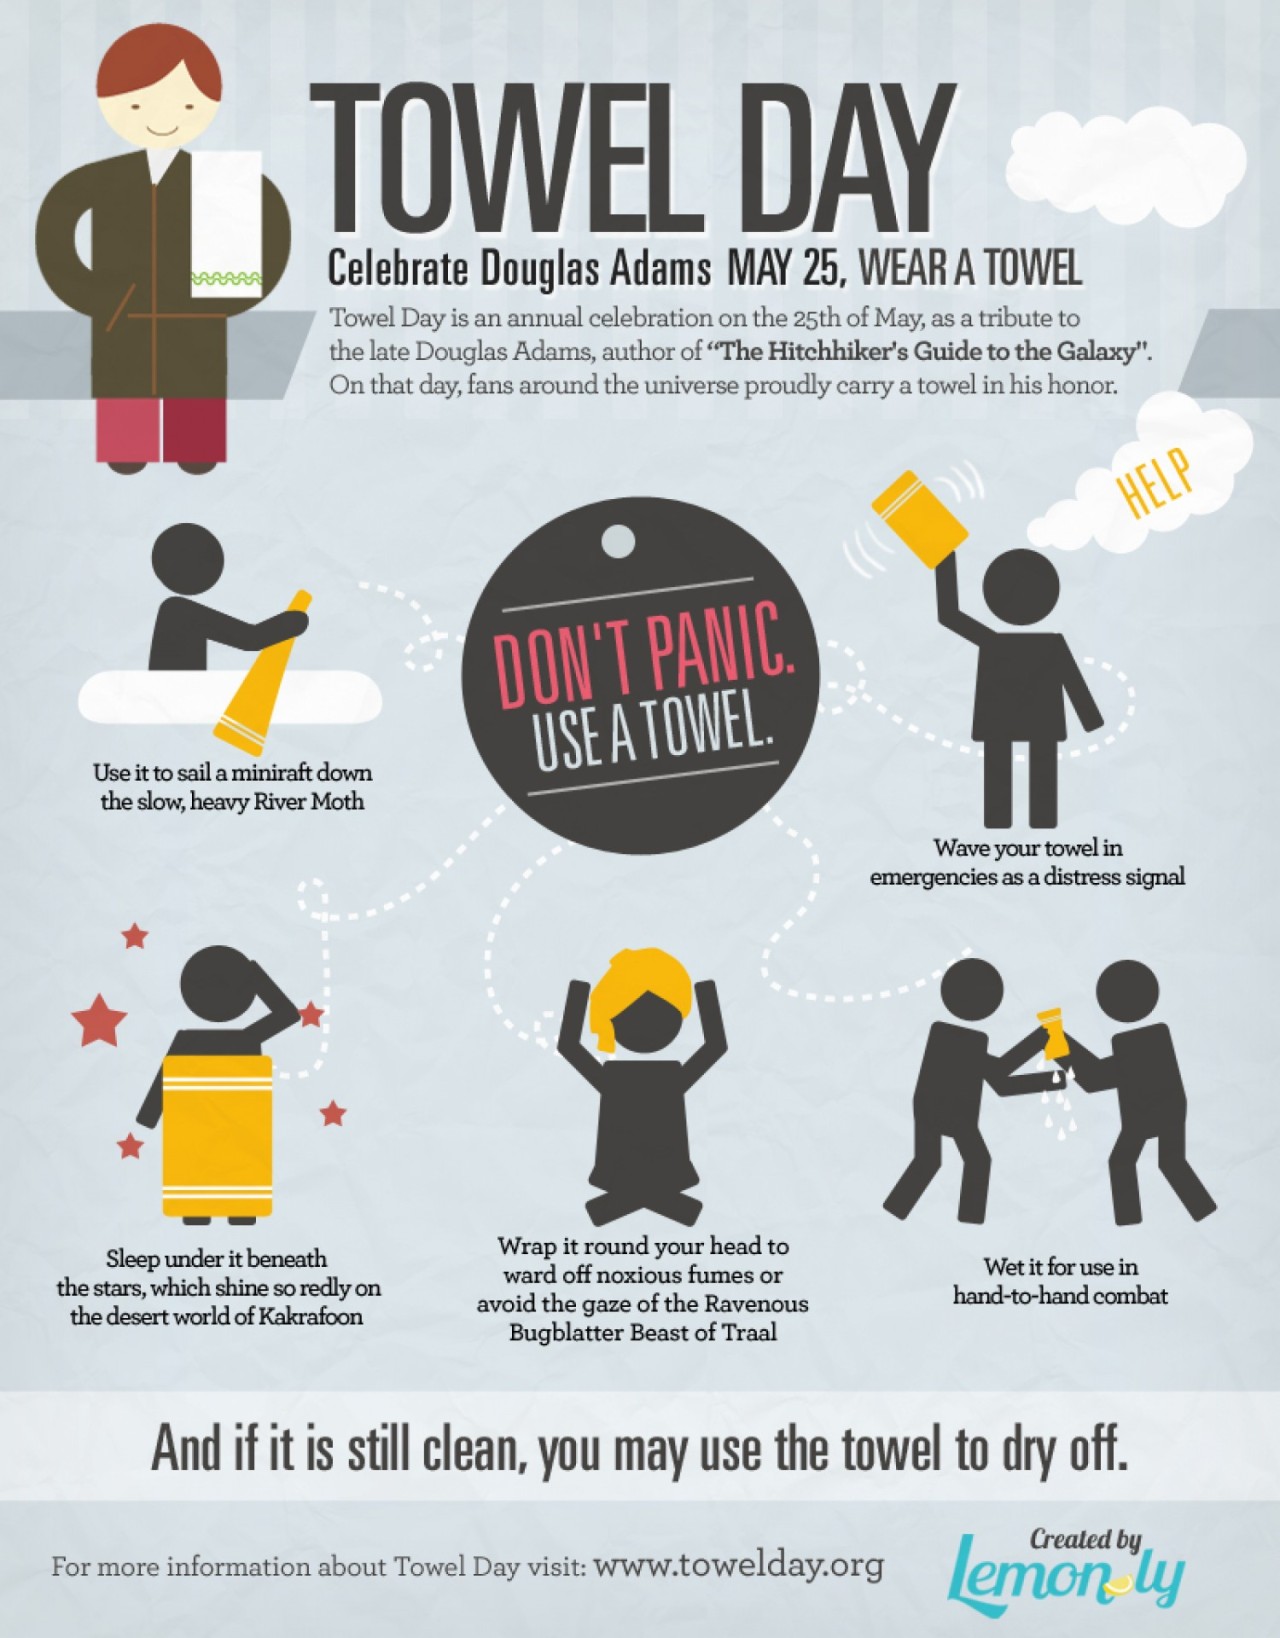 #Towelday
lupoderoma:
“ *
”